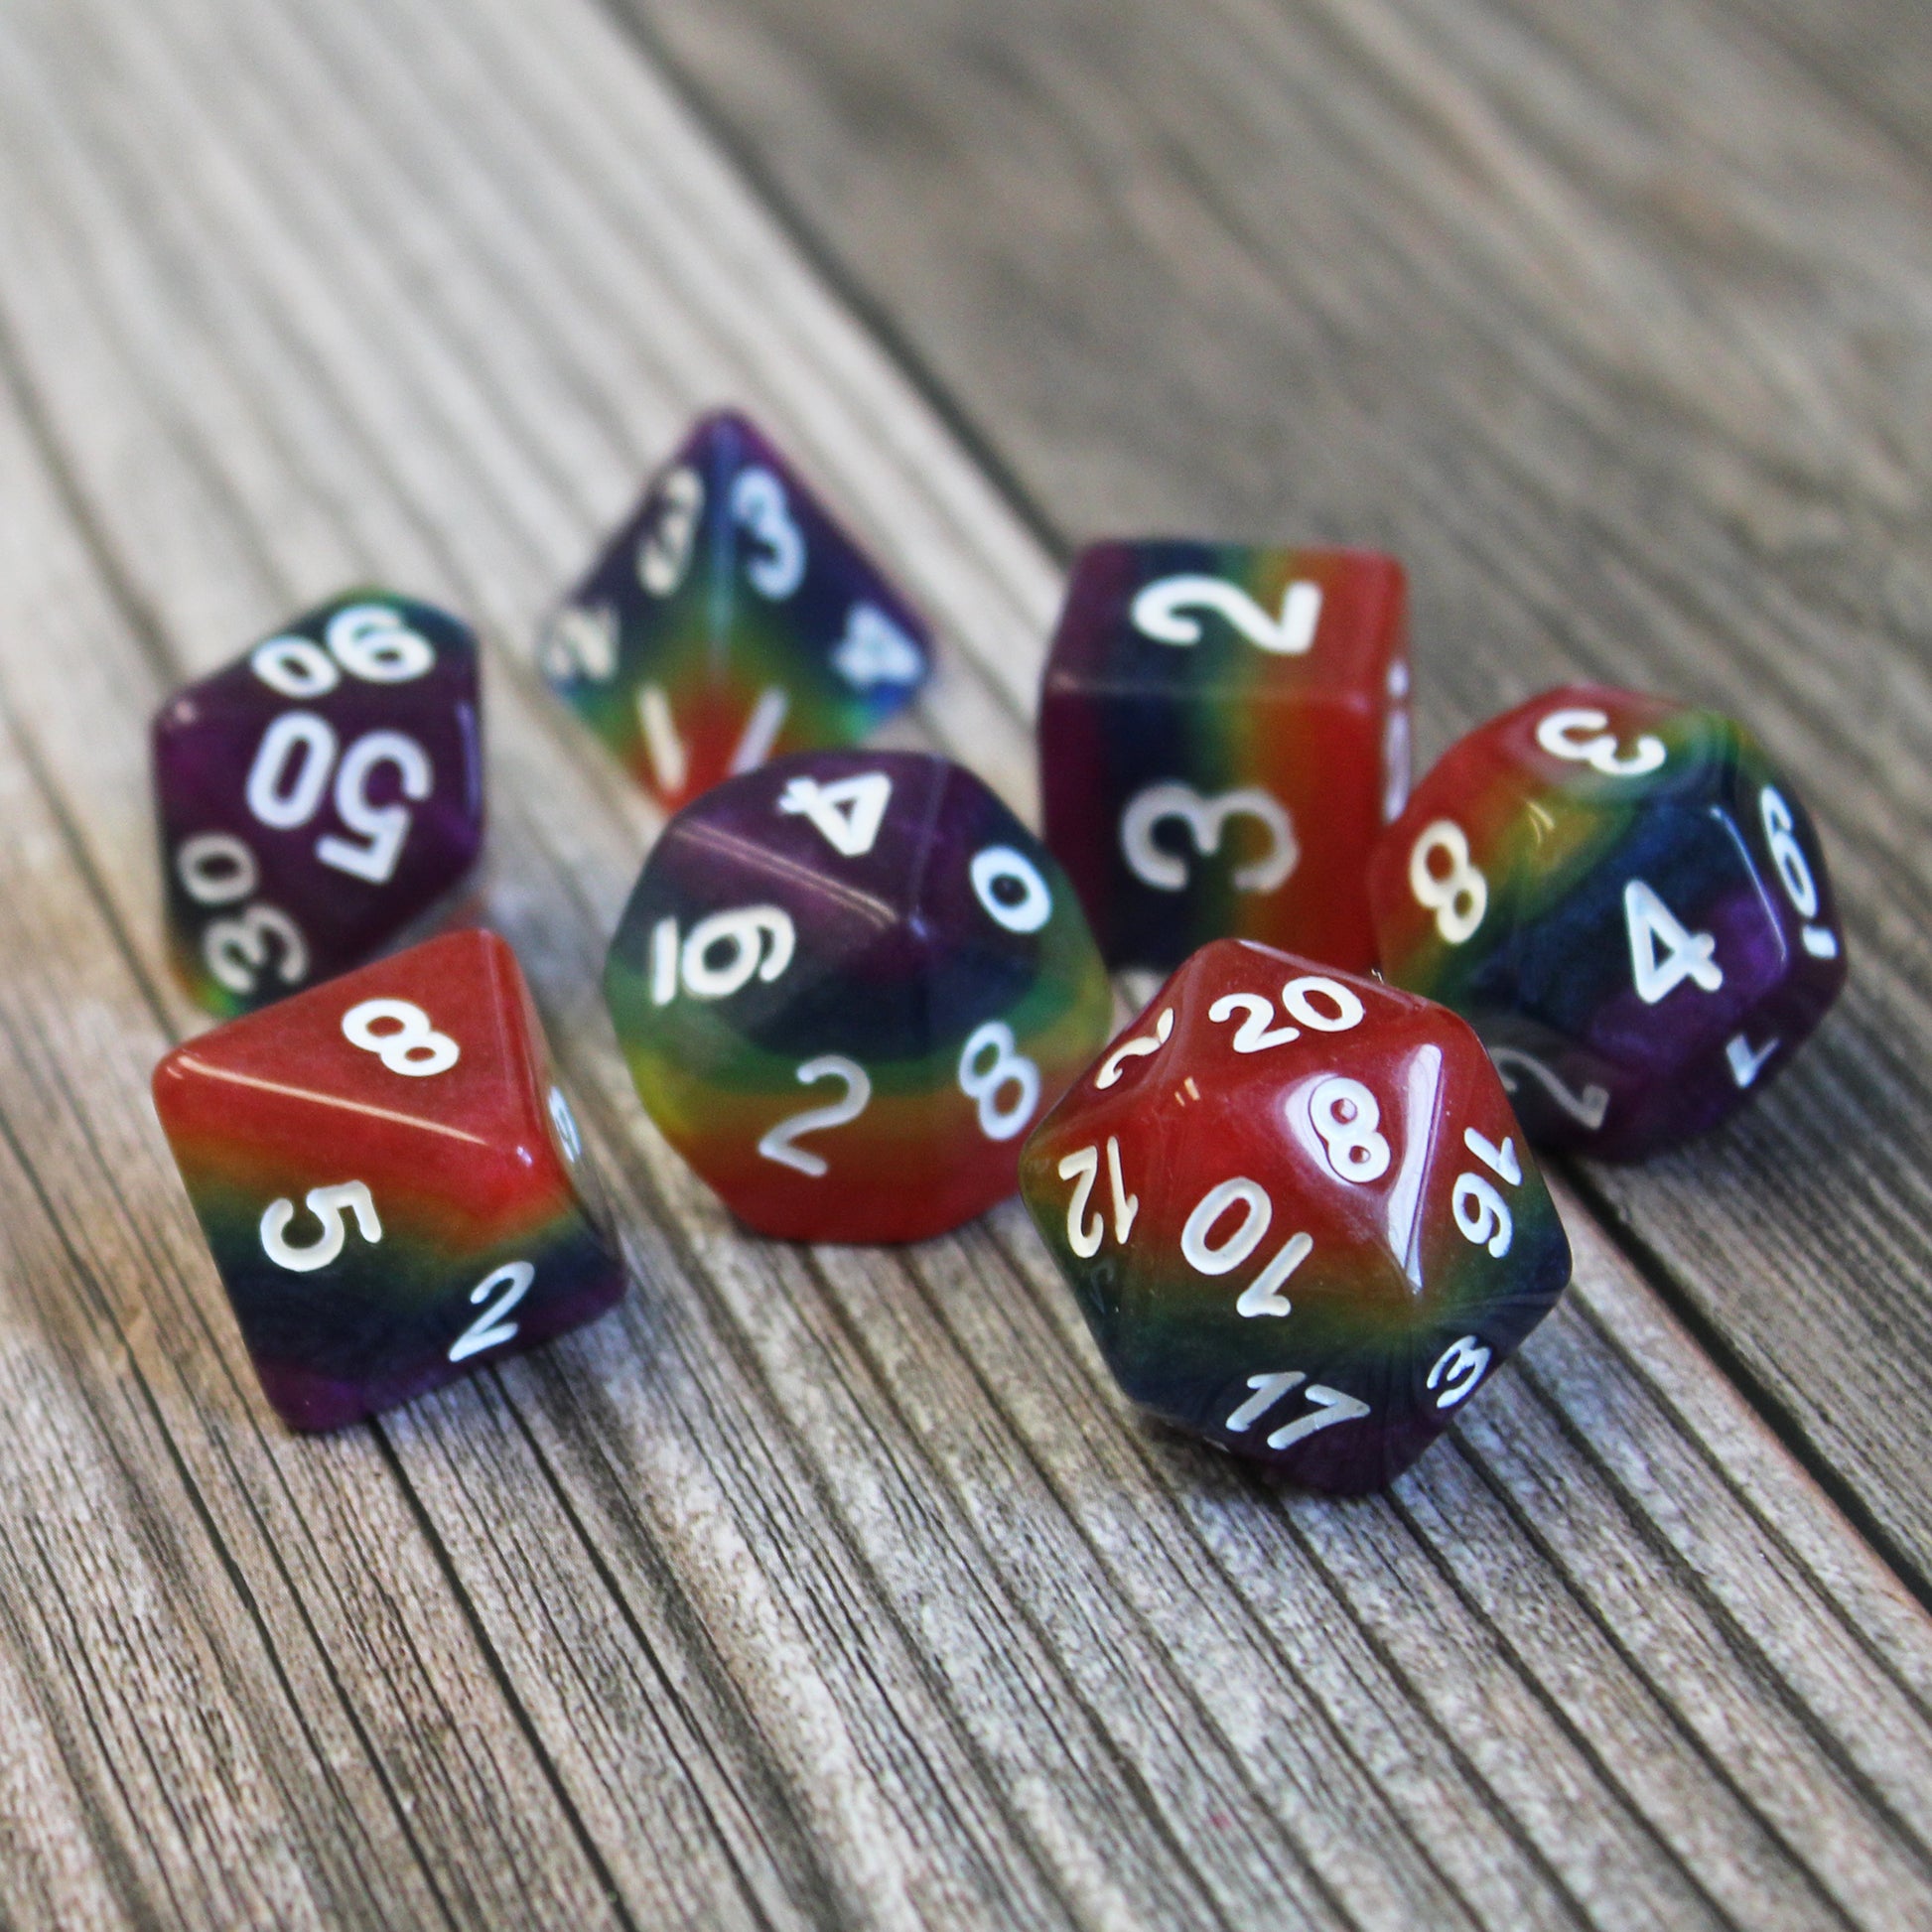 rainbow rpg dice on wood with white numbers